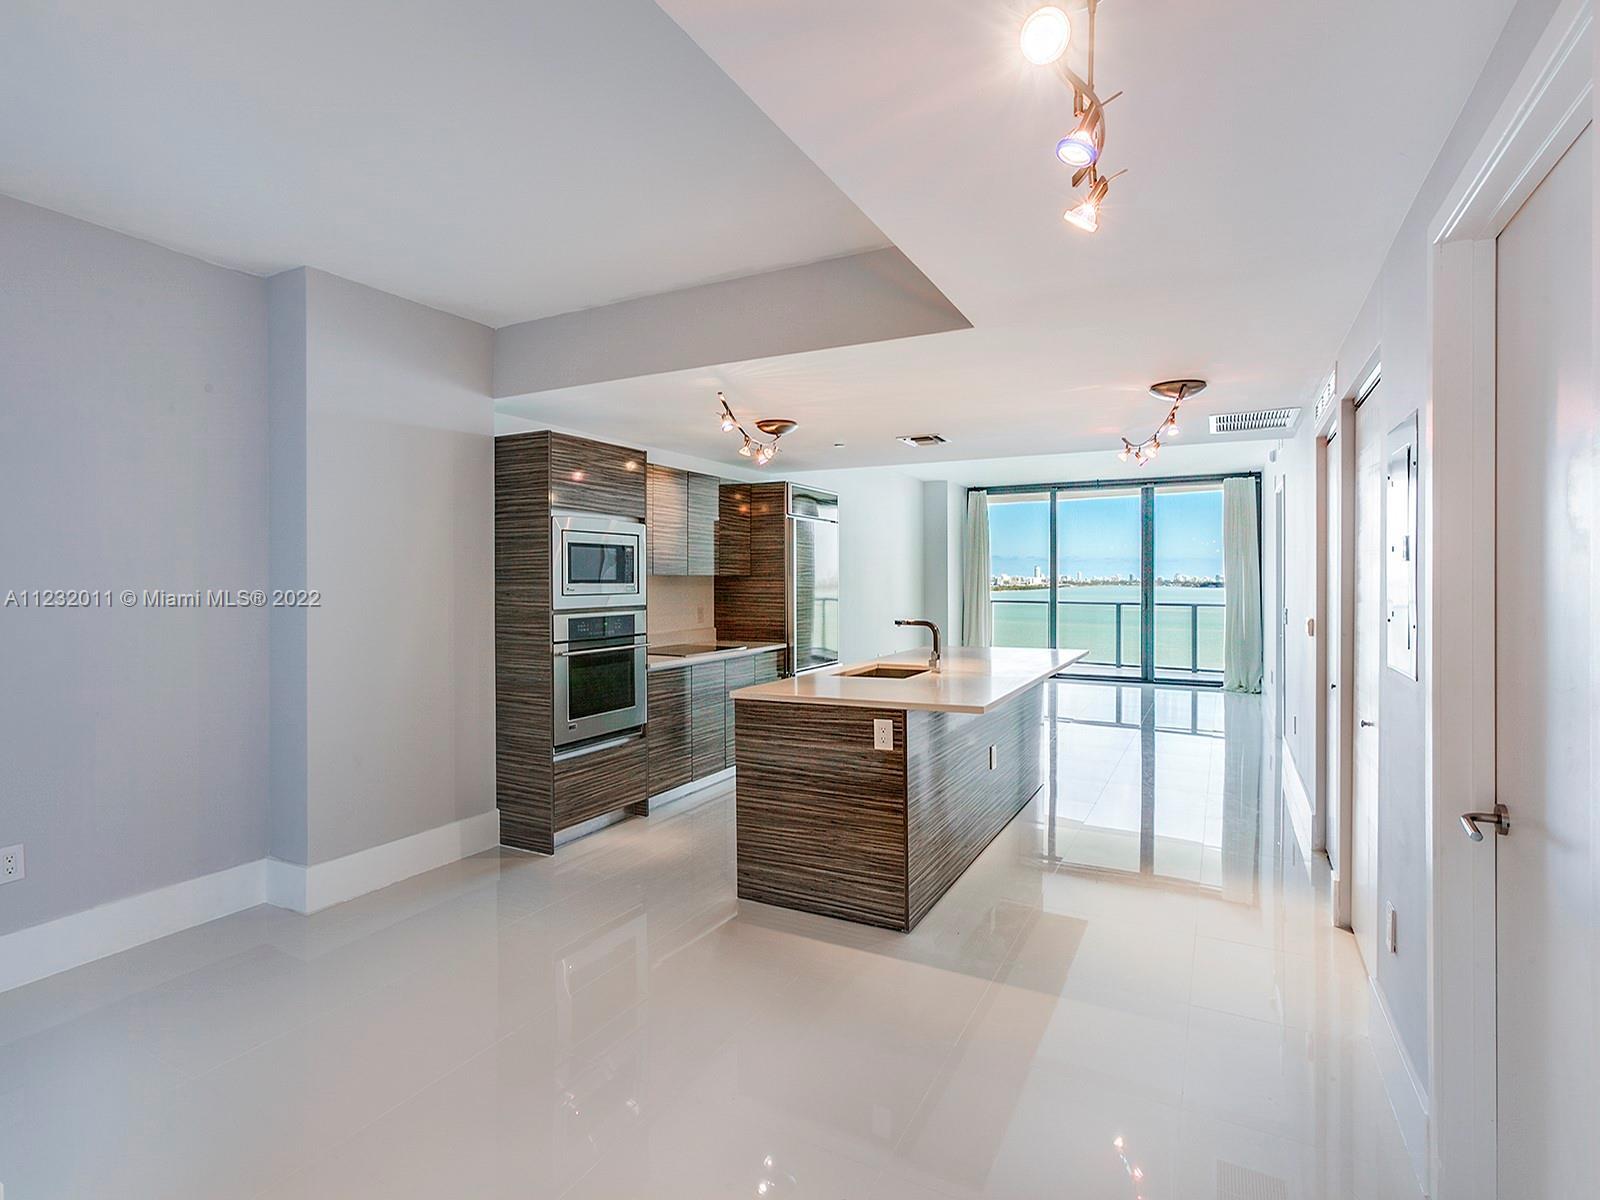 A beautiful two-bedroom, two bathroom condo at the exciting Icon Bay in Edgewater, Miami. Enjoy bril